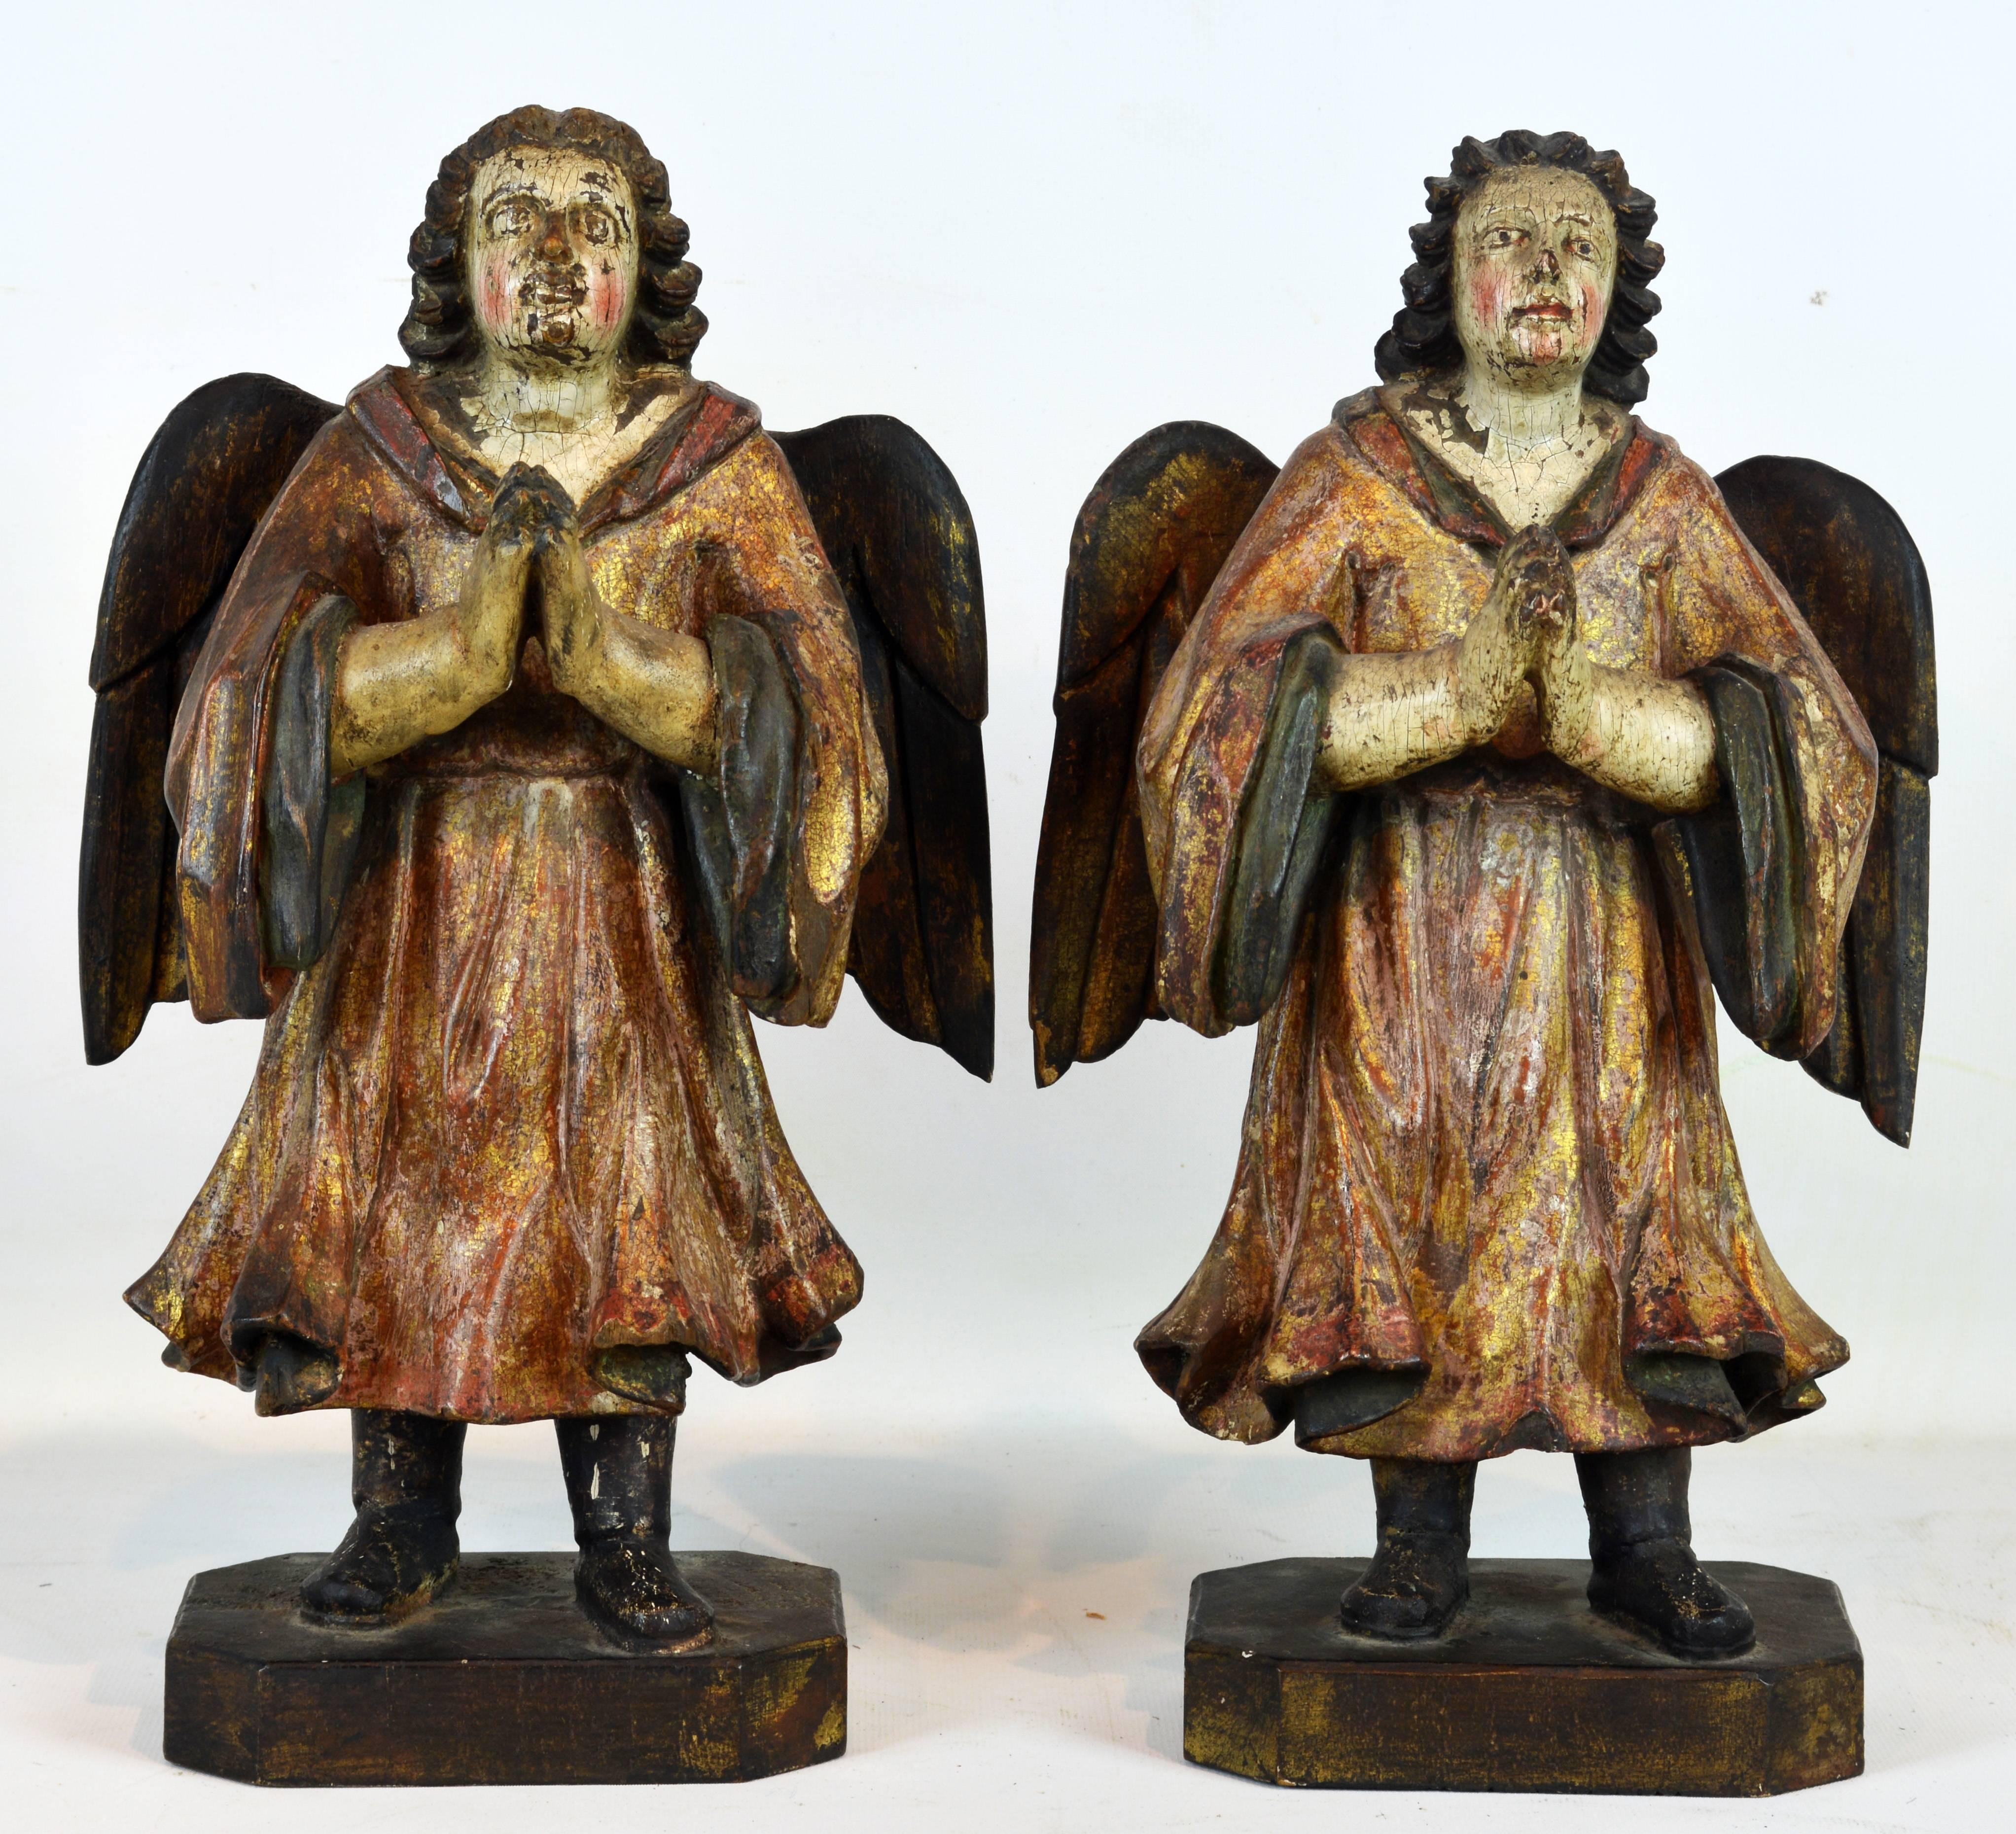 The early 19th century angels standing 13 inches tall with individualized facial expressions resting on square wooden bases with hands folded in prayer wearing beautifully carved robes.